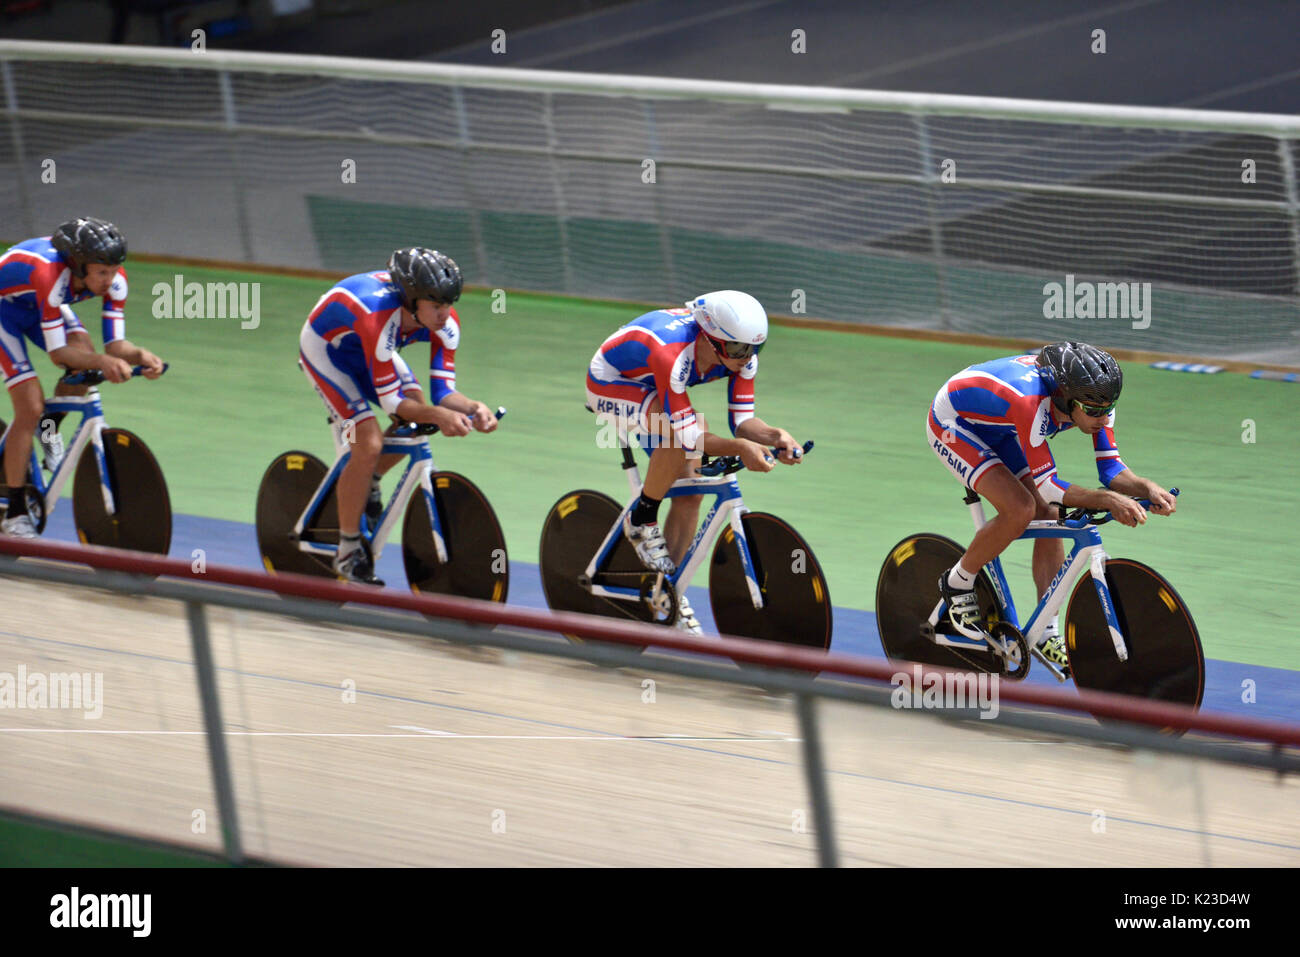 St. Petersburg, Russia - August 11, 2015: Unidentified riders compete in team race during Russian track cycling championship. Velodrome Lokosphinx hos Stock Photo